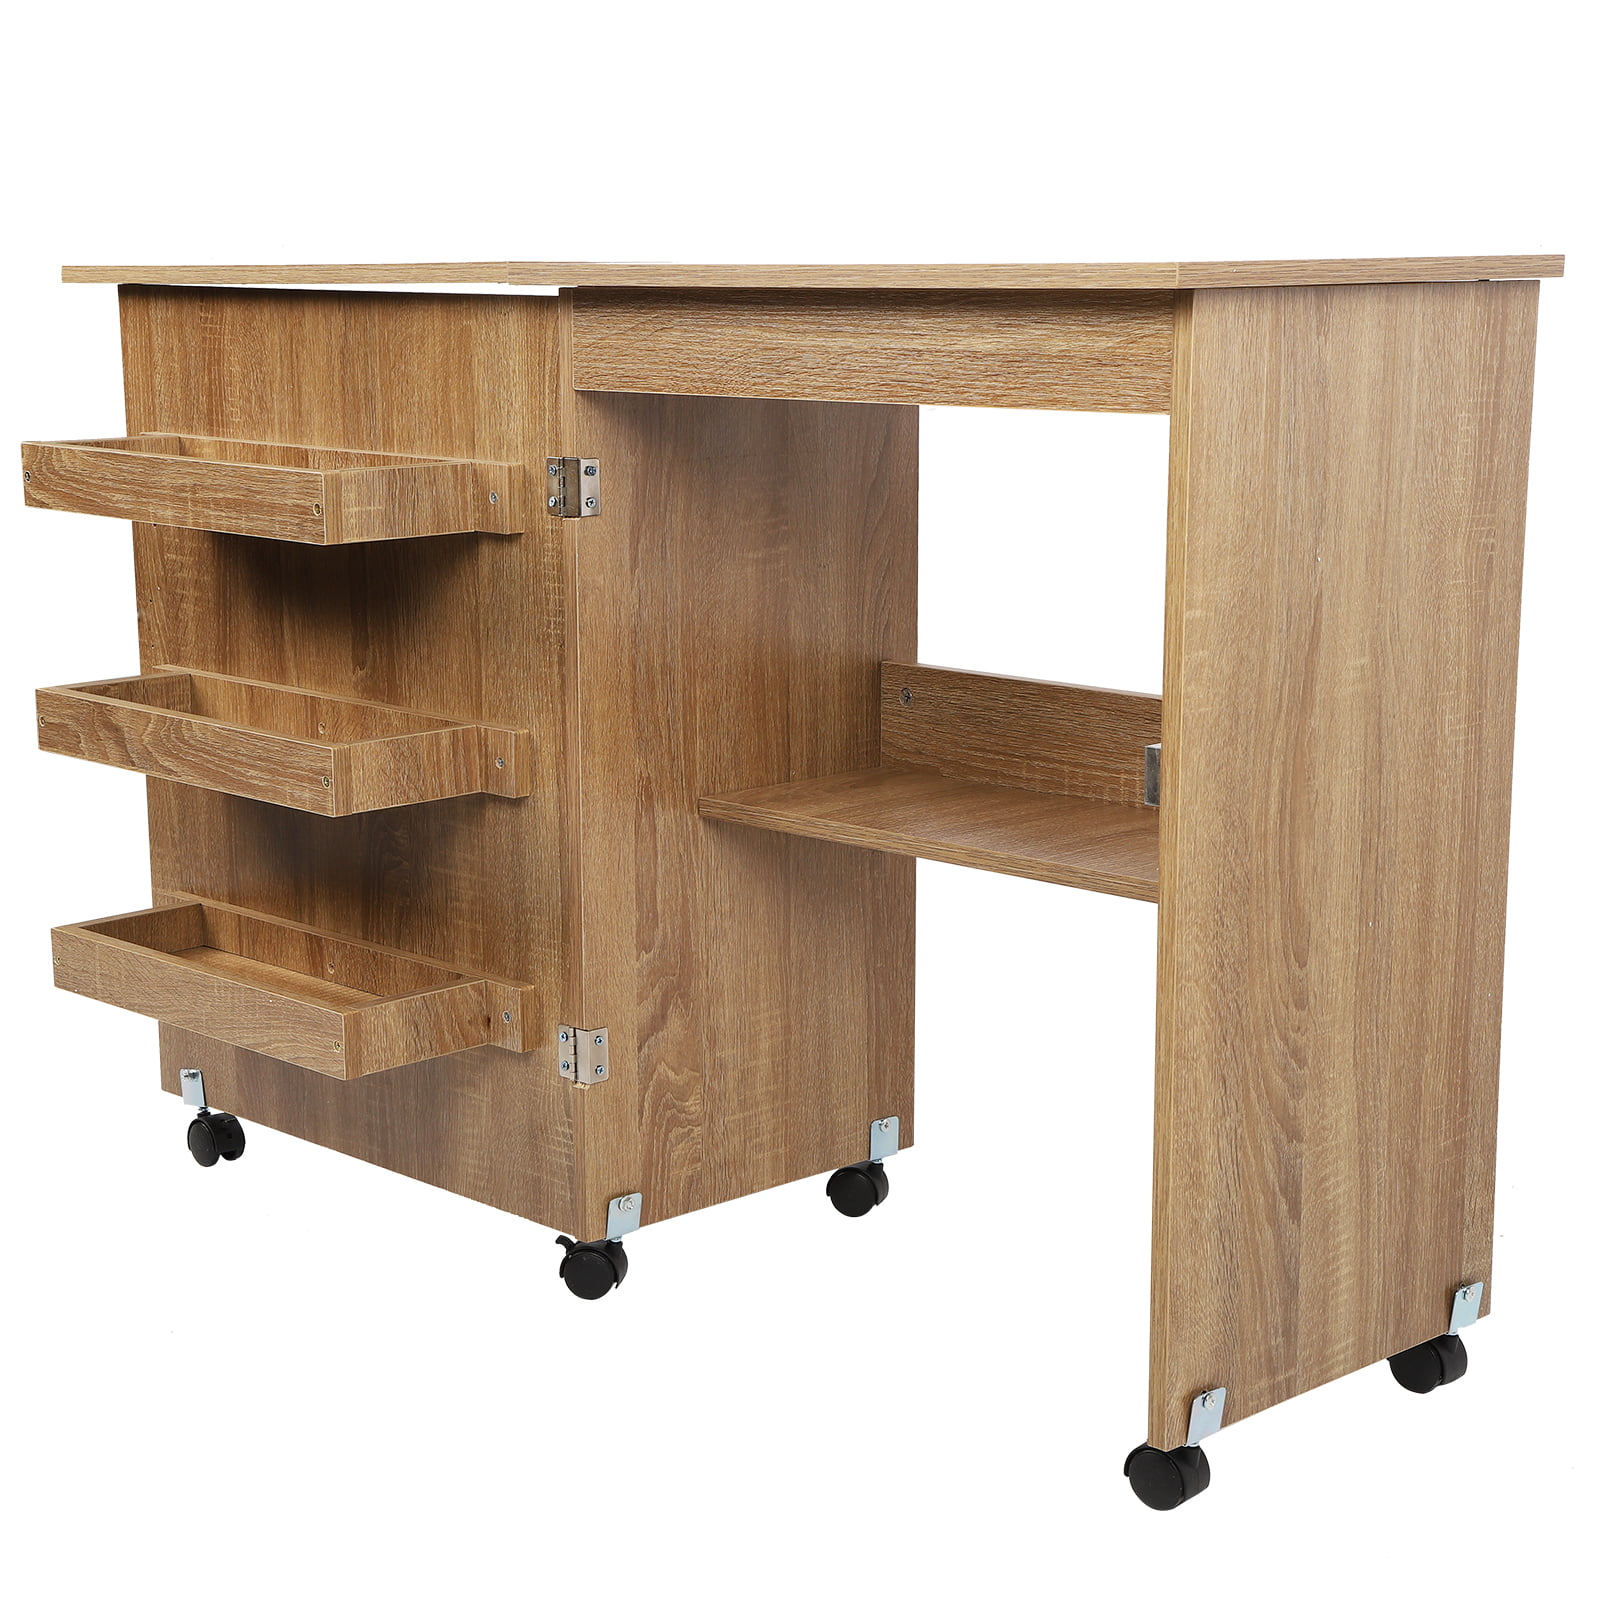 Folding Craft Cart Wood Side Desk Sewing Cabinet with Storage Shelves Lockable Casters Brown Sewing Table Zerone Sewing Table 